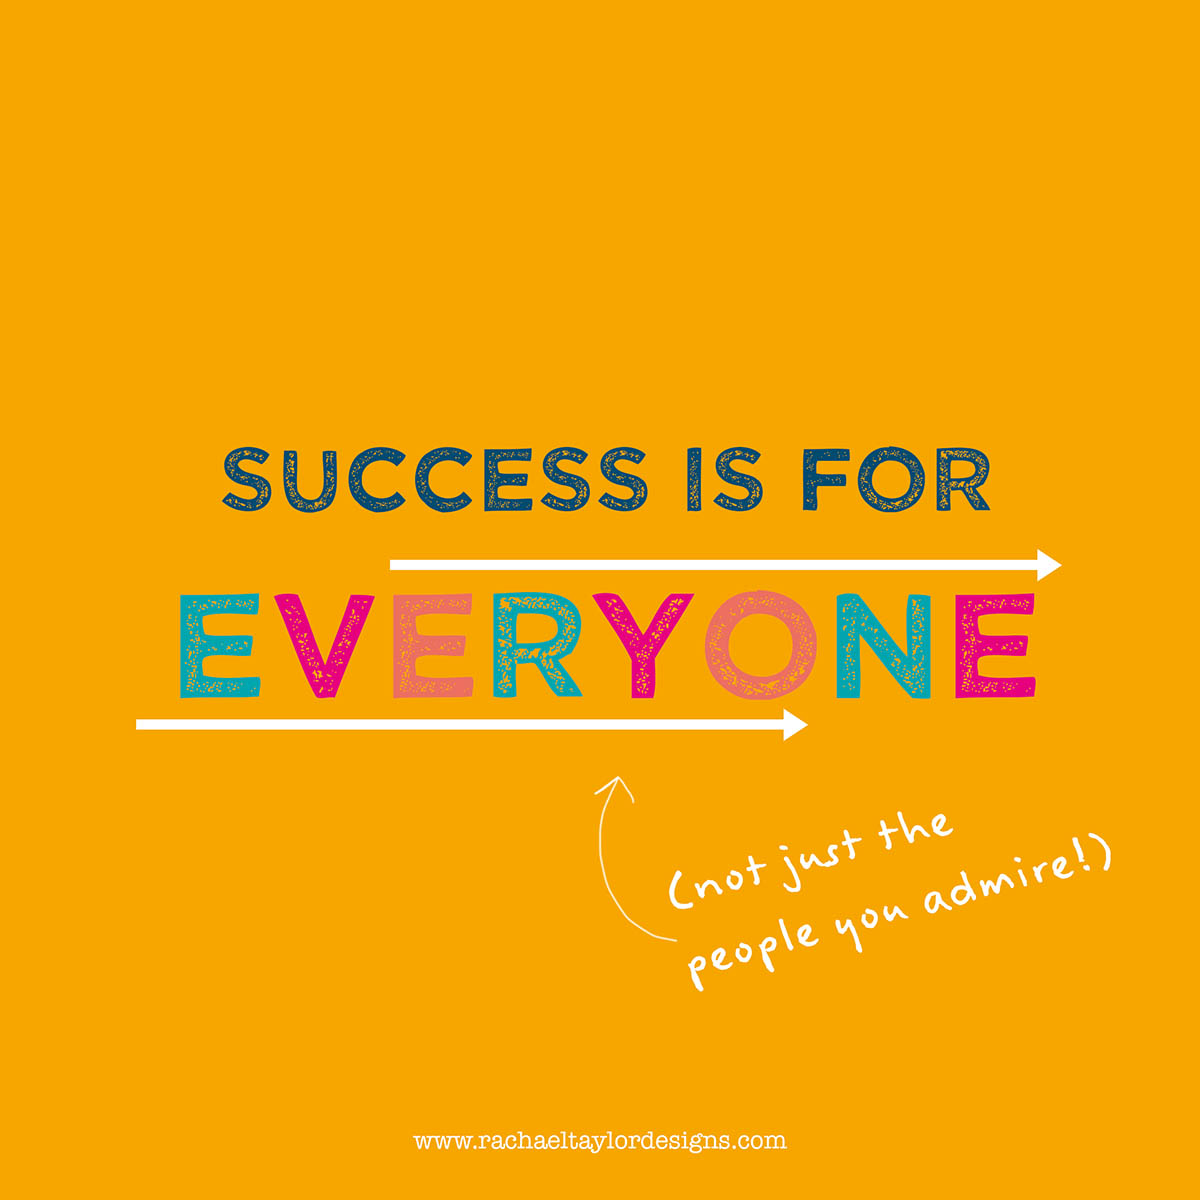 Creative success is for everyone - yes you too!